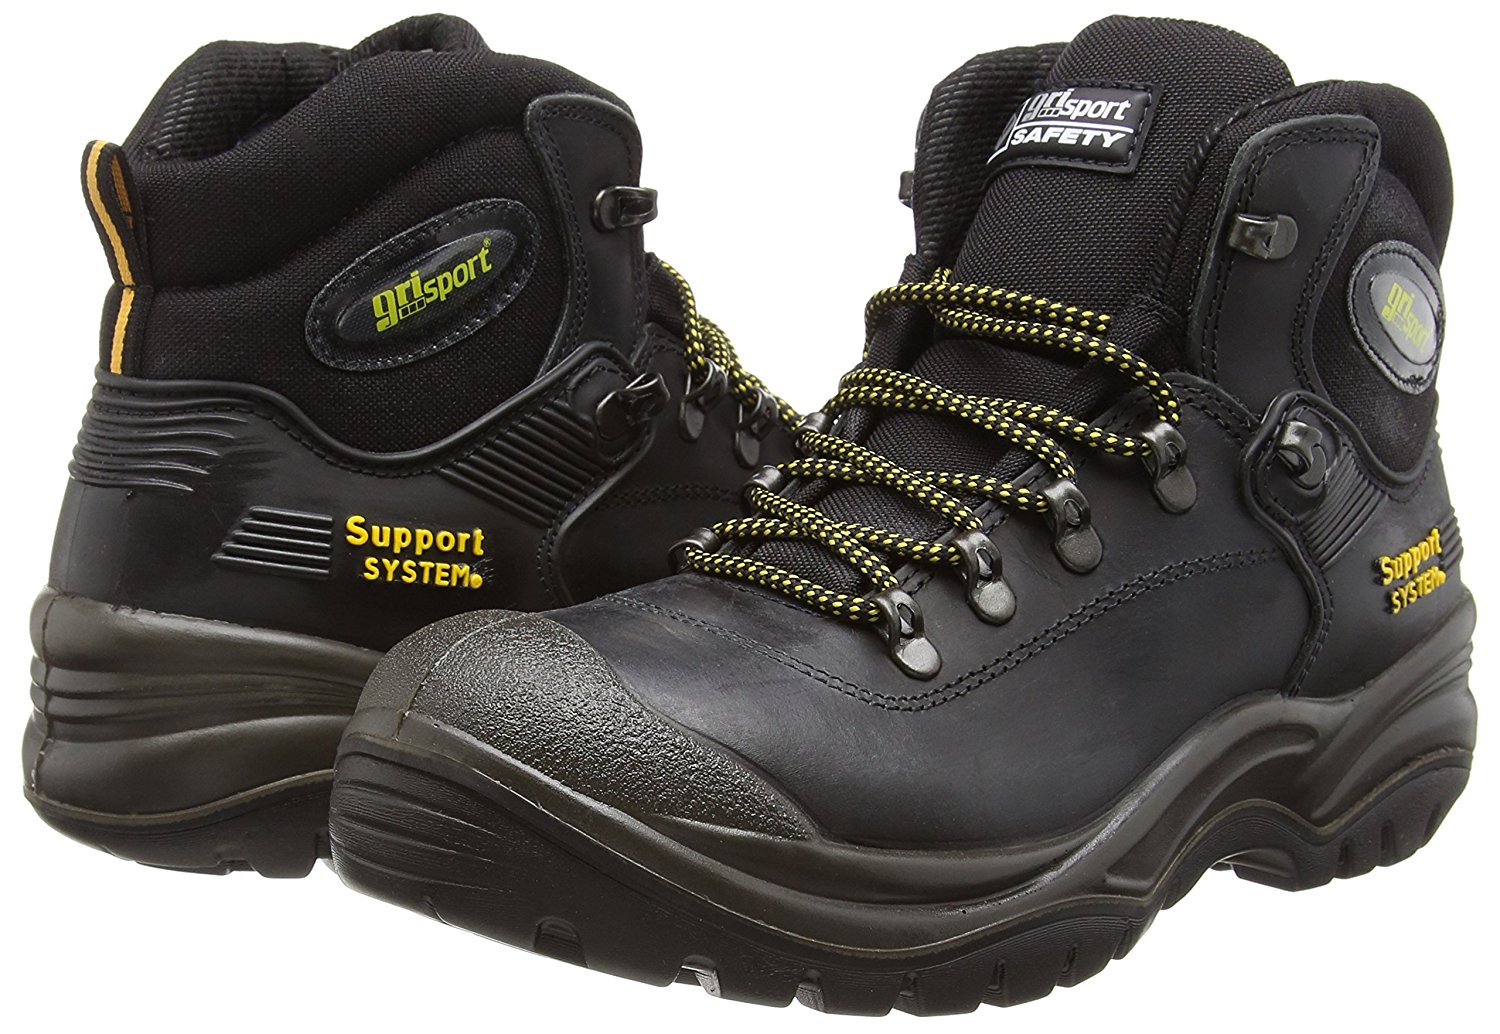 Gri Sport Contractor Safety Boot S3 